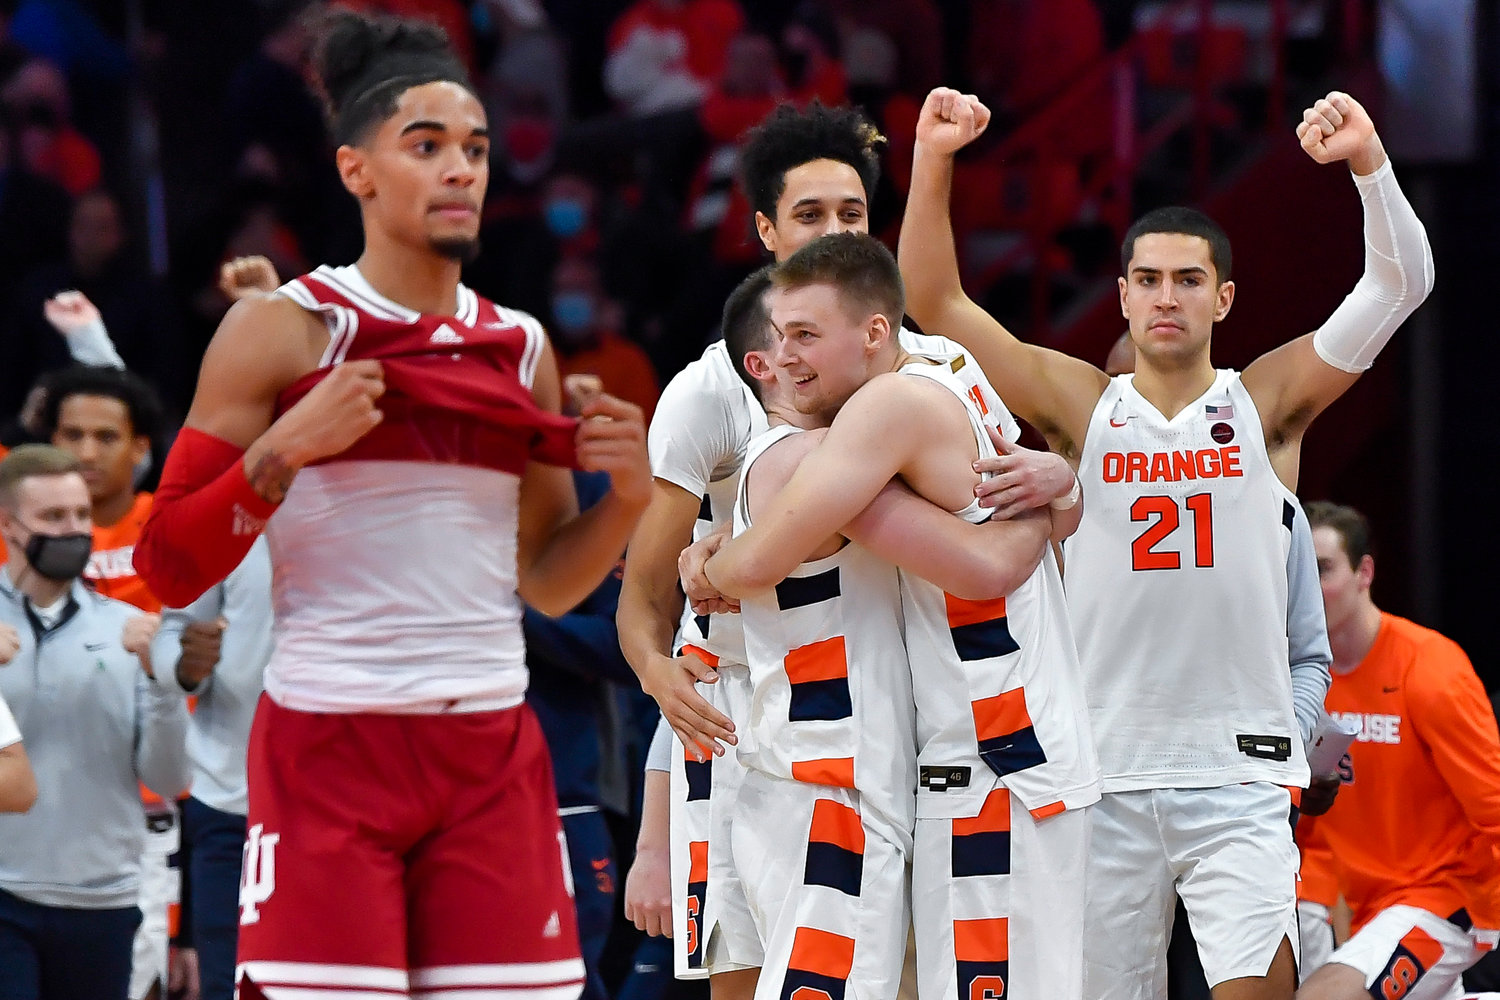 DOUBLE OVERTIME THRILLER — Syracuse guard Buddy Boeheim, center, hugs guard Joe Girard as forward Cole Swider (21) celebrates their win as Indiana guard Khristian Lander, left, walks to his bench after a college basketball game in Syracuse on Tuesday night. Syracuse won 112-110 in double overtime.